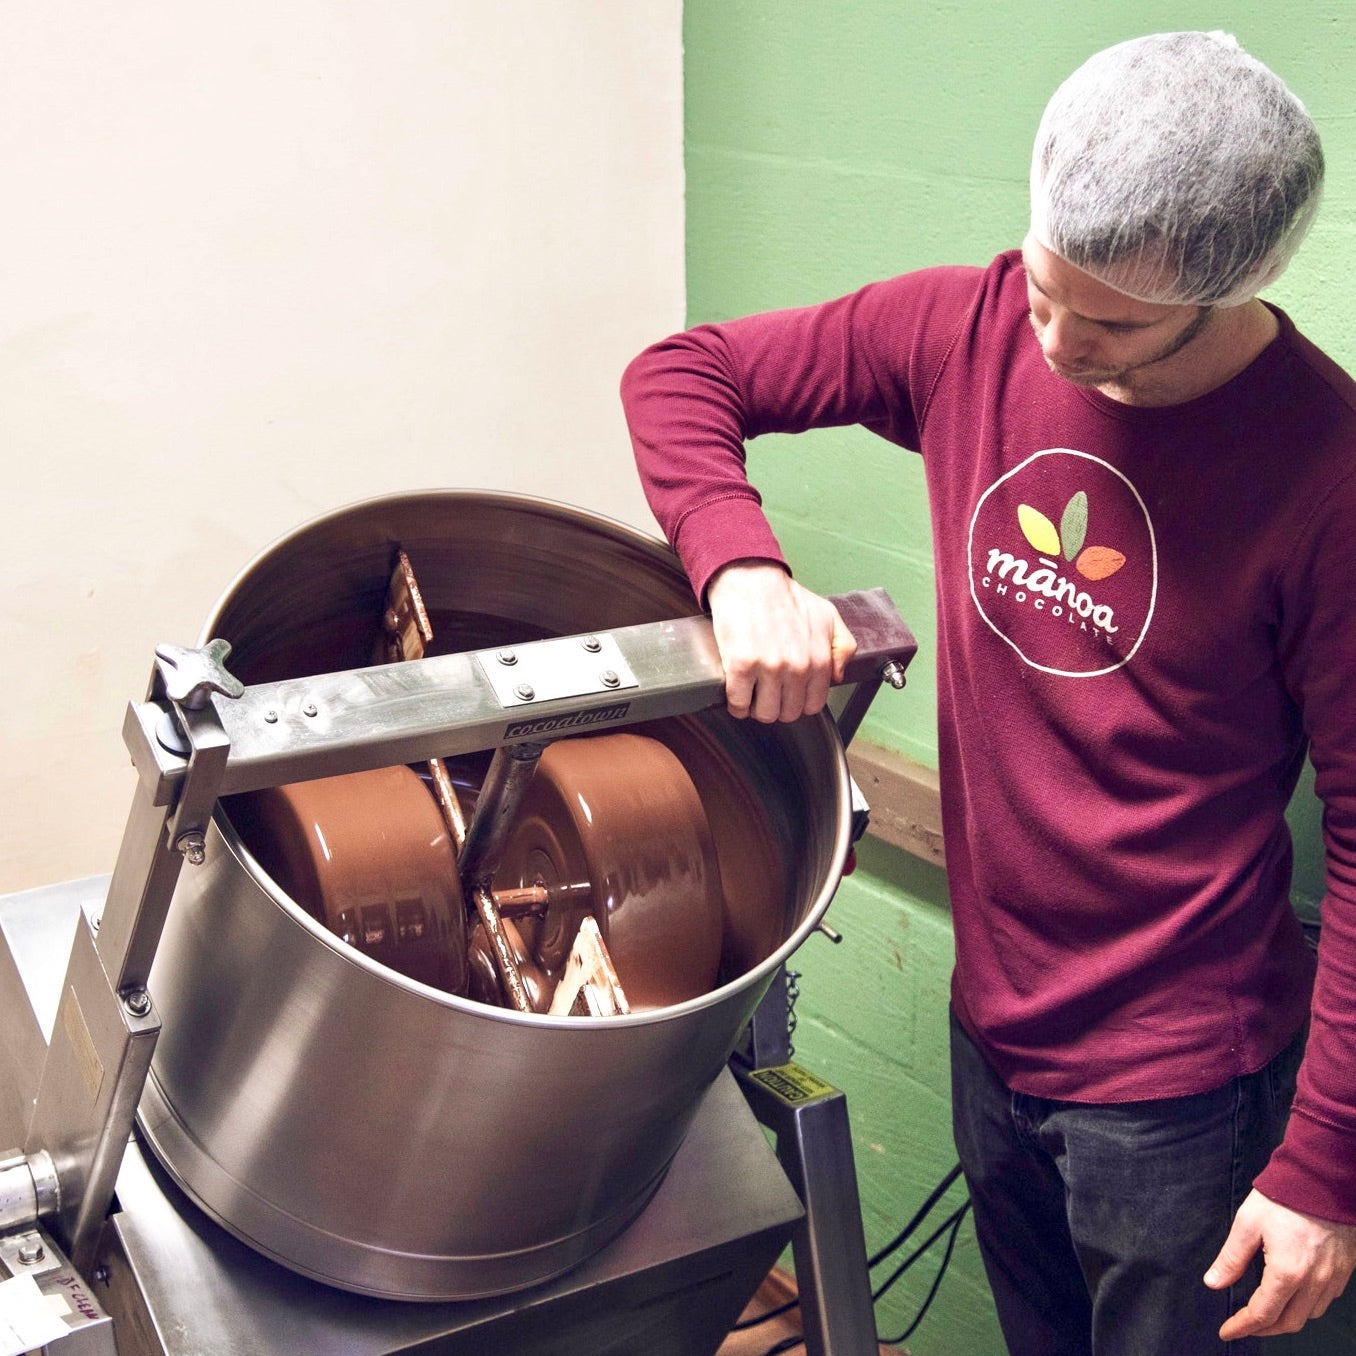 Image of man operating industrial chocolate-making equipment